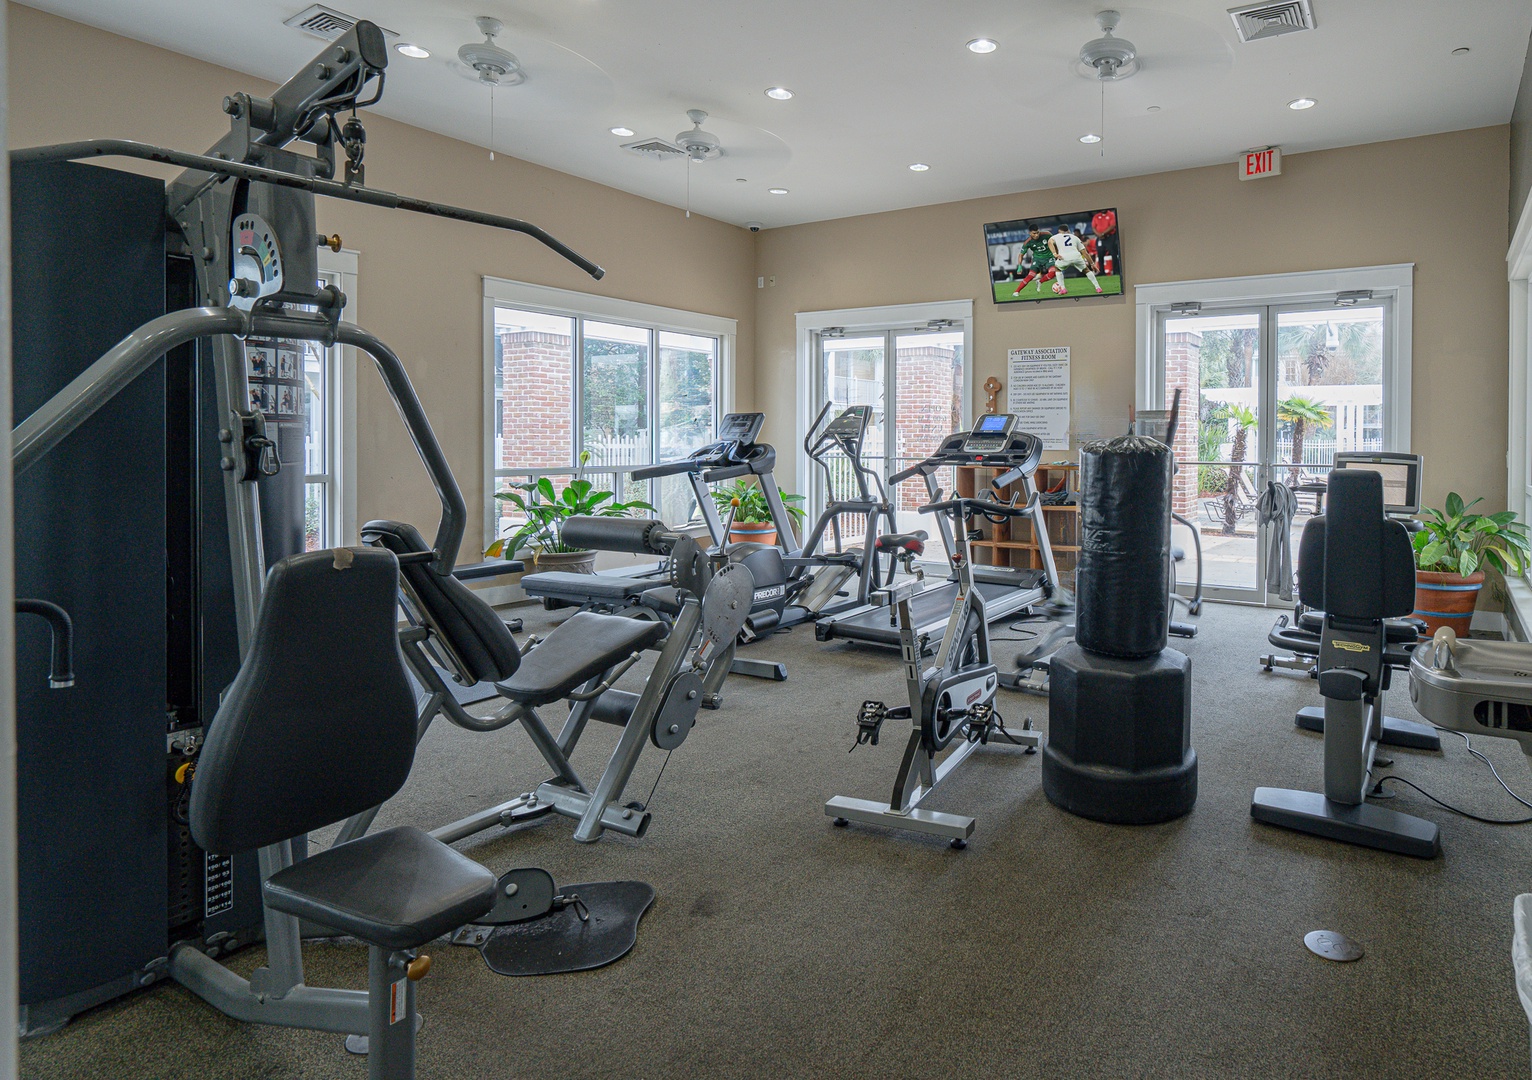 Crush your goals in the community fitness room